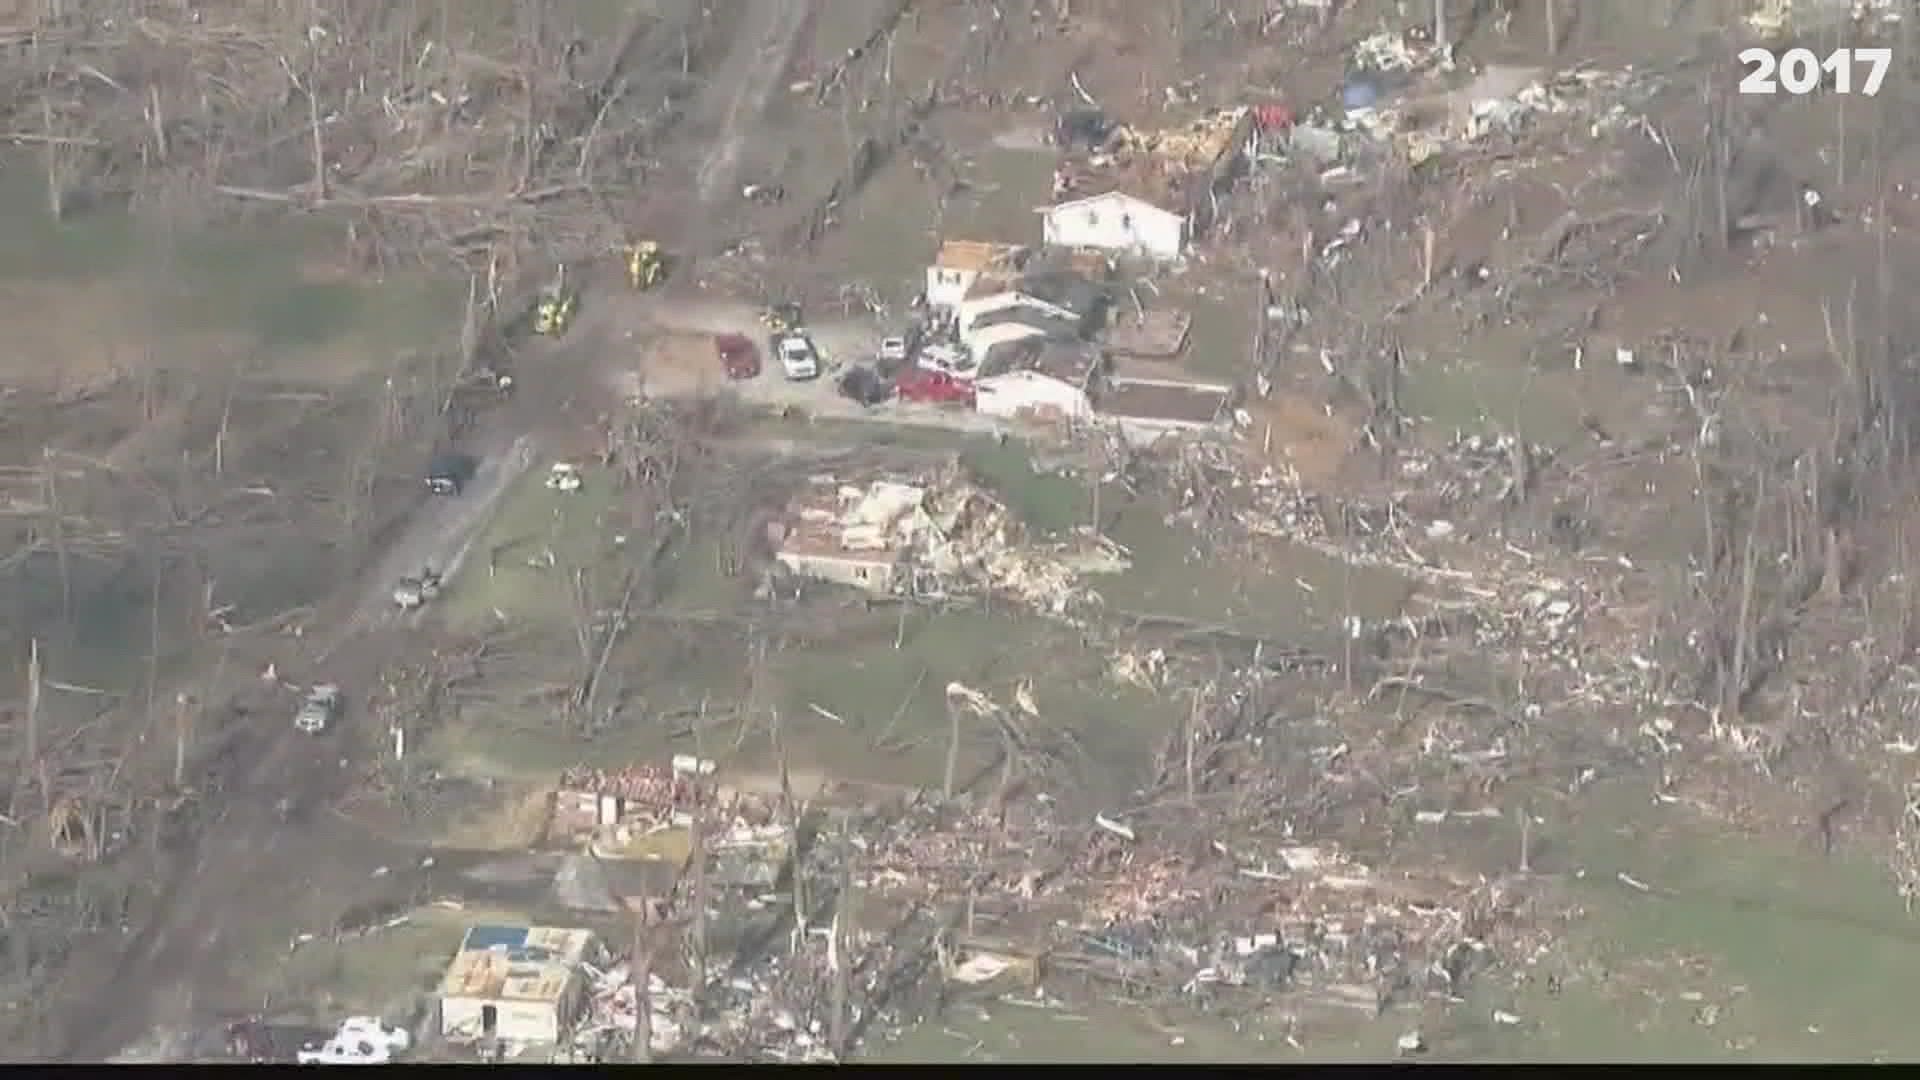 The 2017 tornado left one person dead. This is 5 On Your Side coverage of the event.